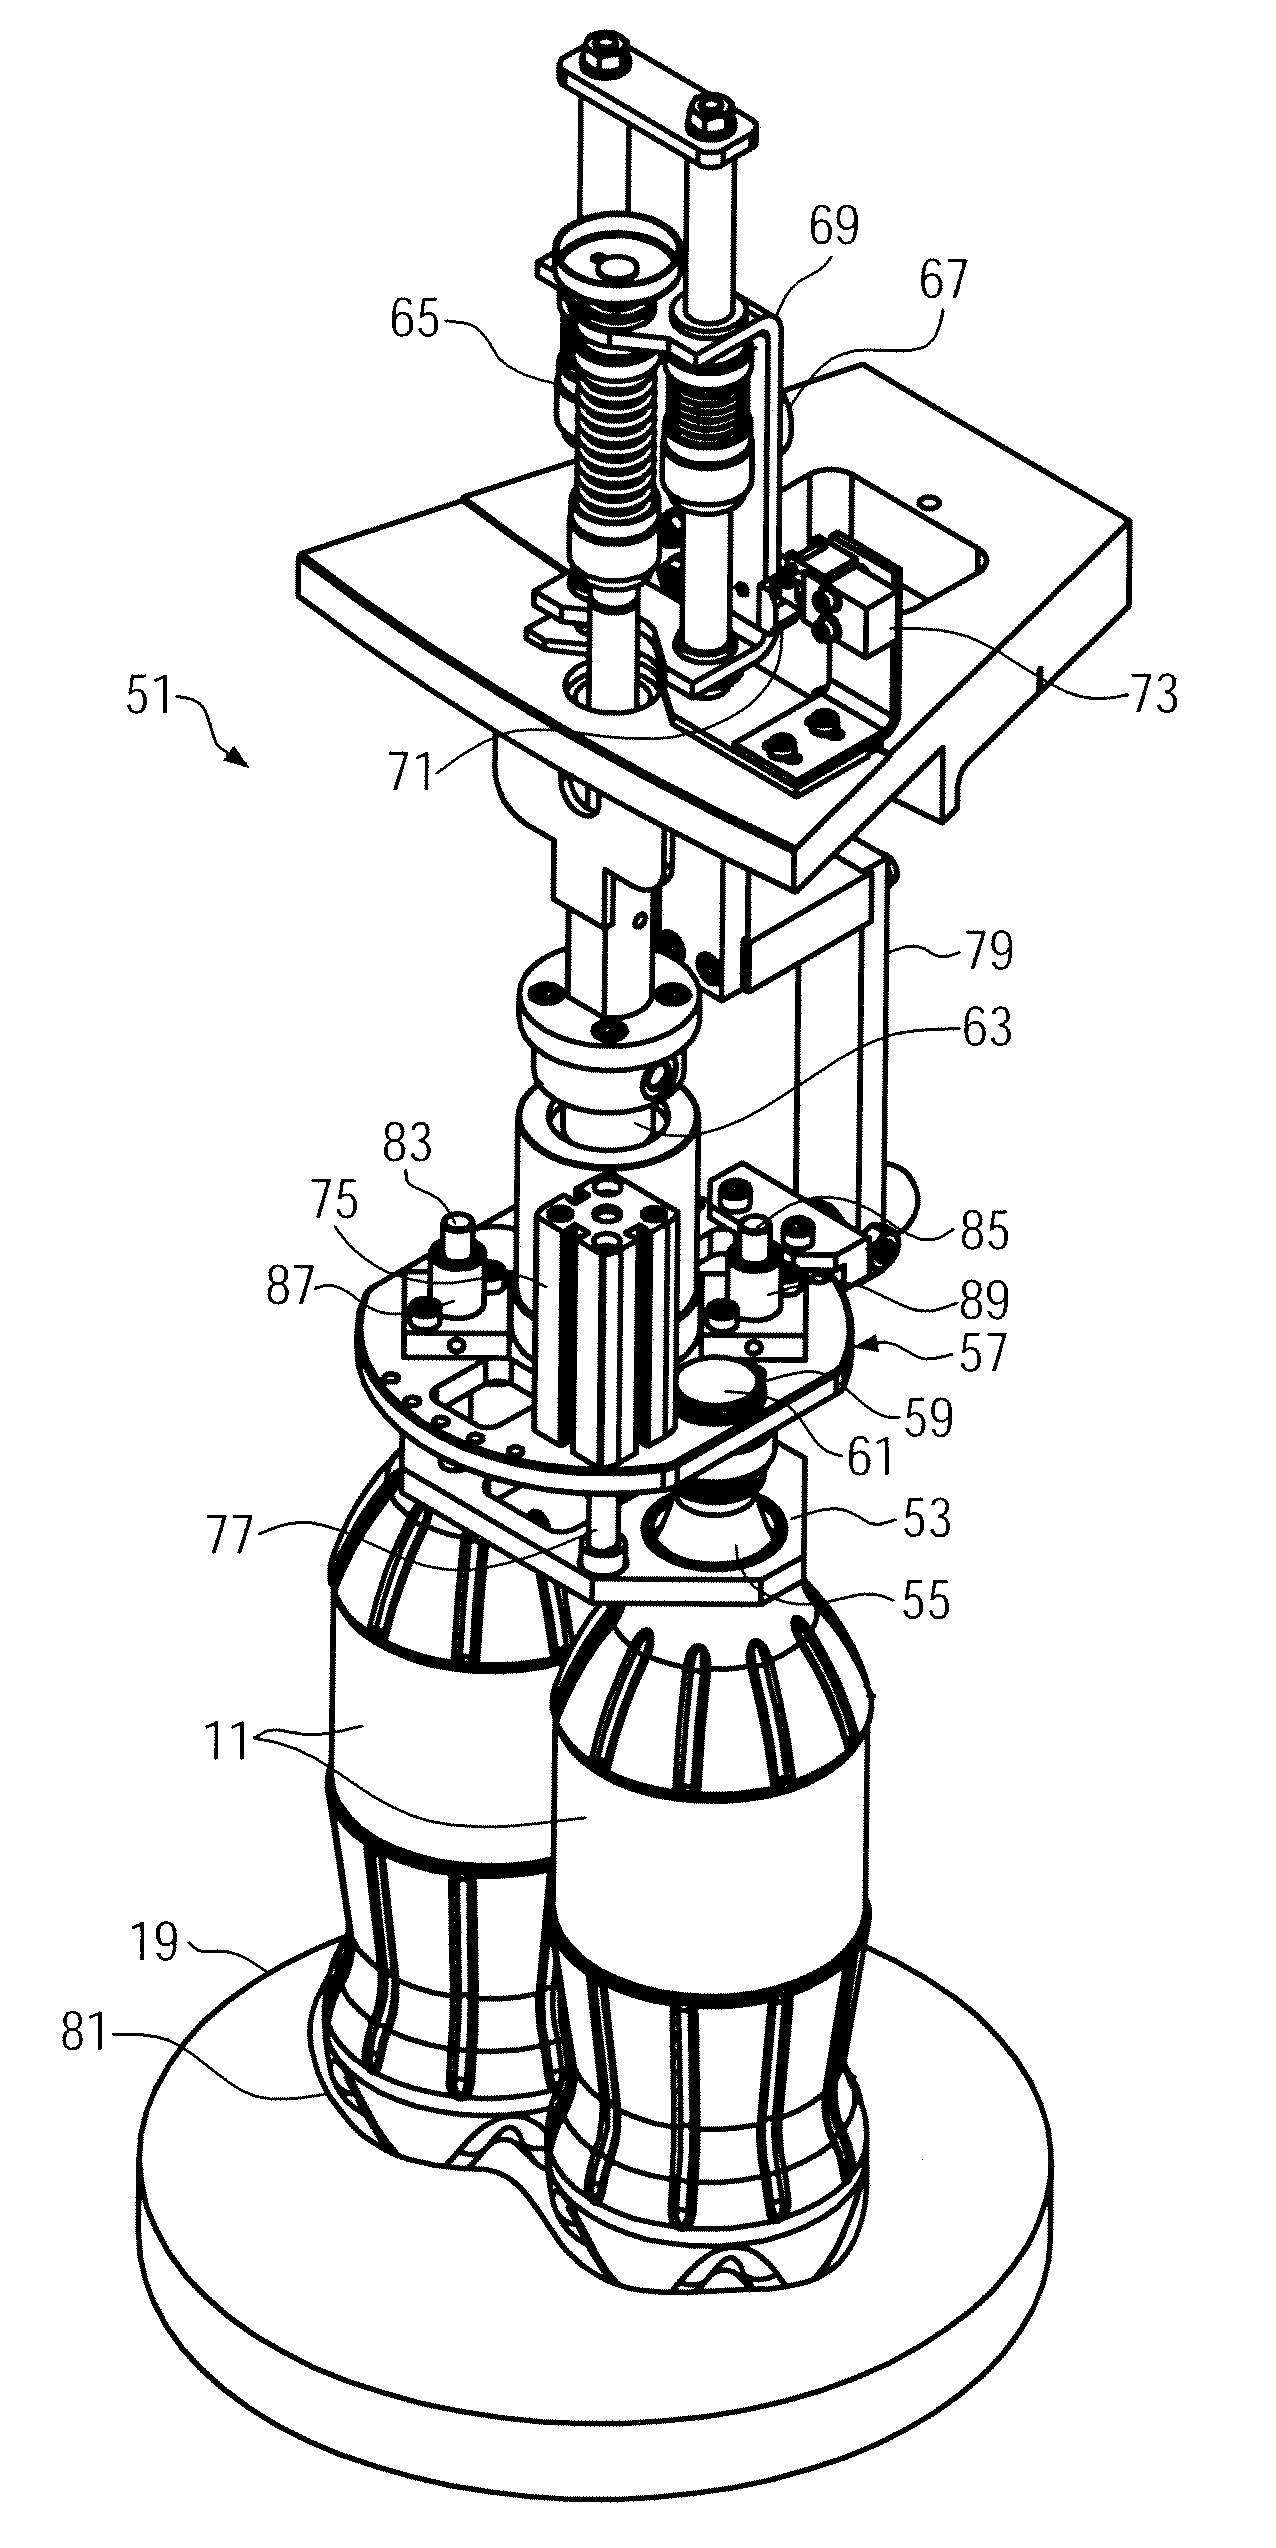 Centering Unit for Aligning at Least Two Grouped Vessels and Method for Aligning Two Grouped Vessels